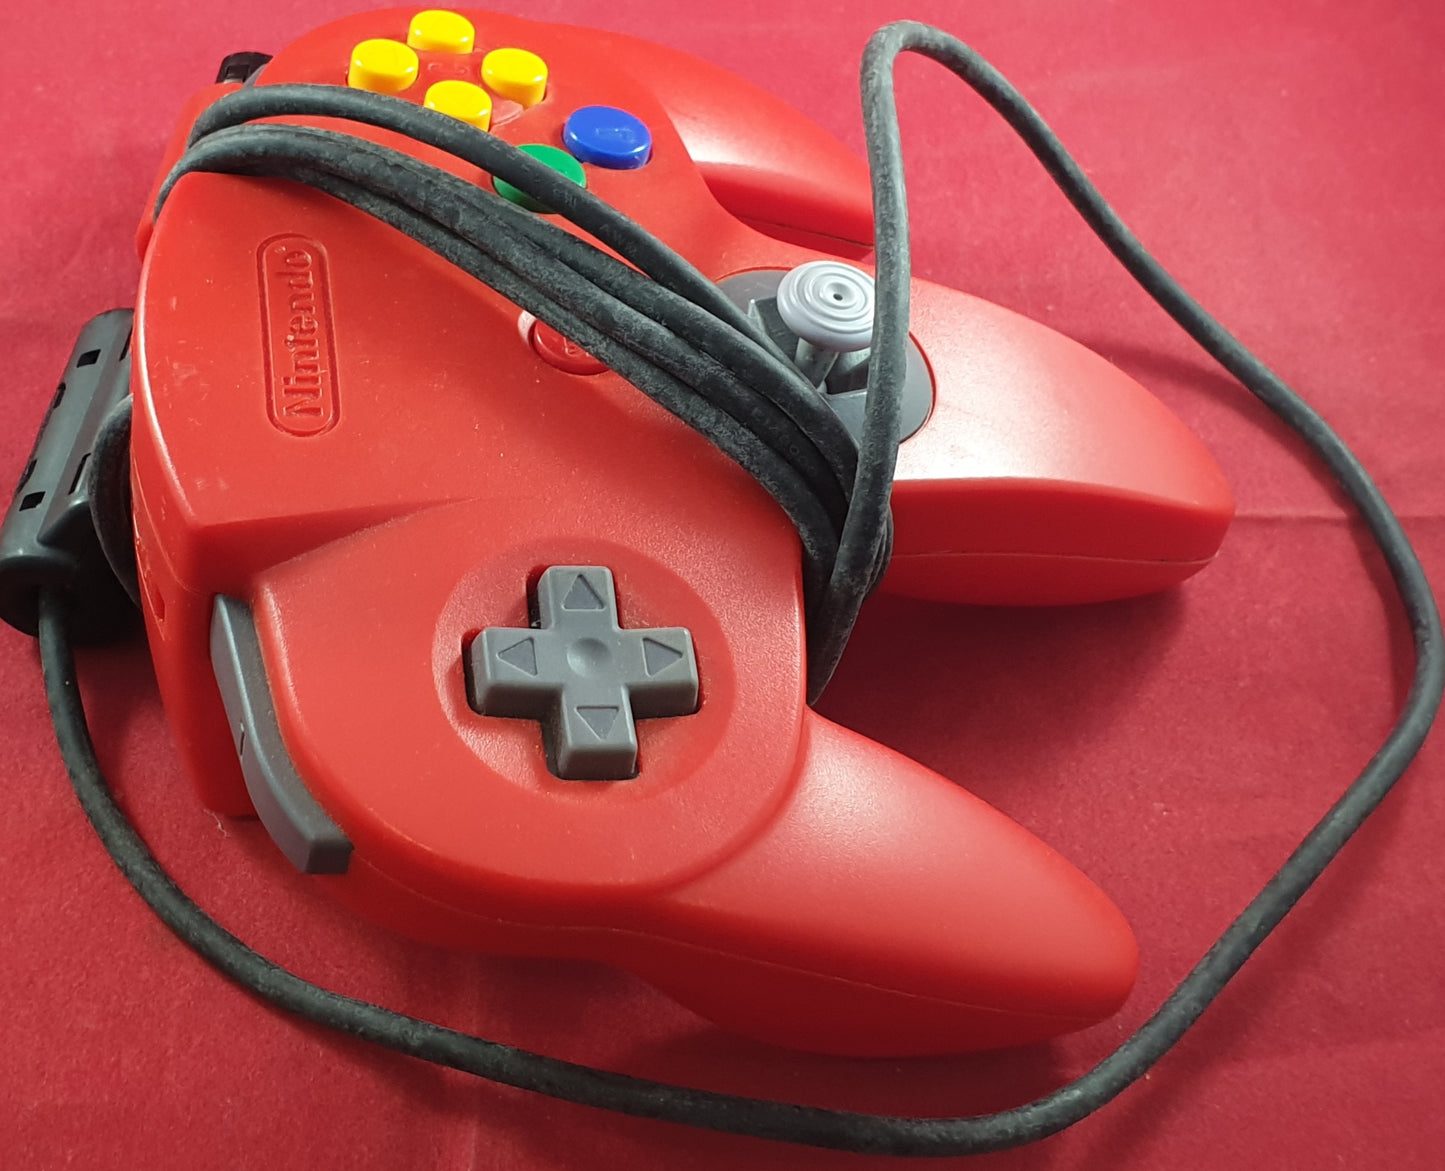 Red Official Nintendo 64 (N64) Controller Accessory